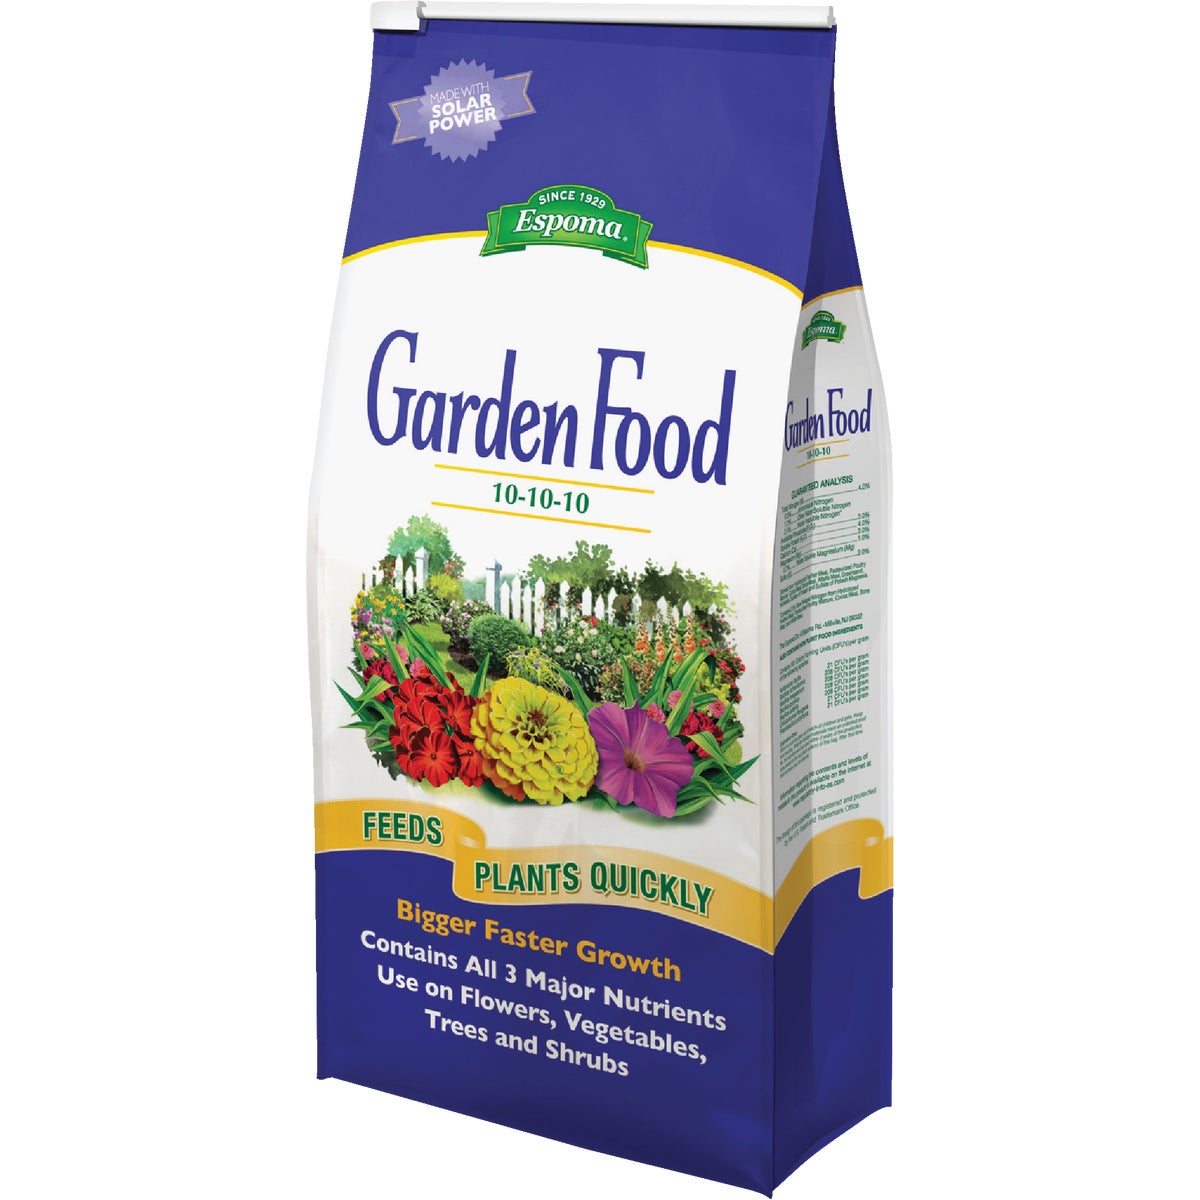 Item 704219, Plant food that feeds plants quickly with a synthetic blend for fast 